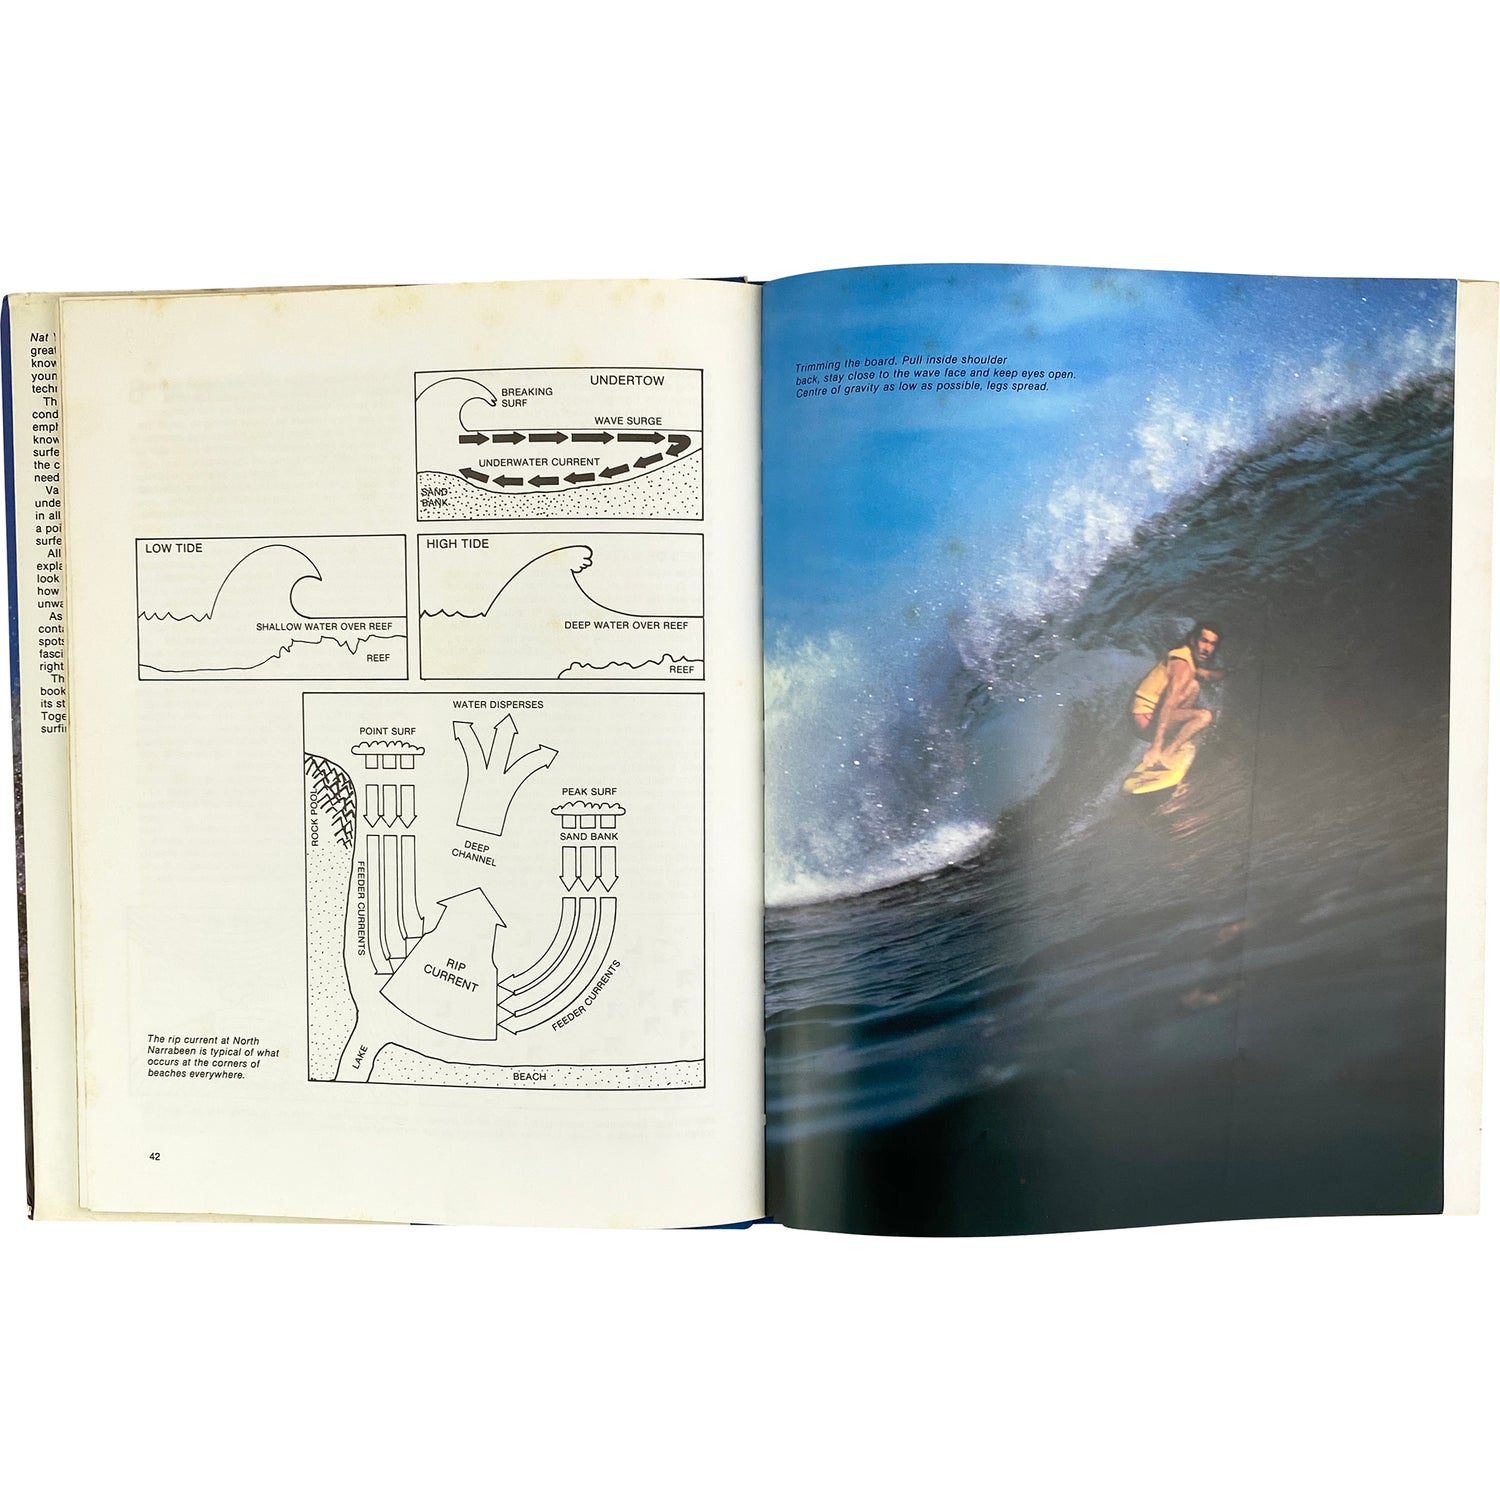 NAT YOUNG'S BOOK OF SURFING